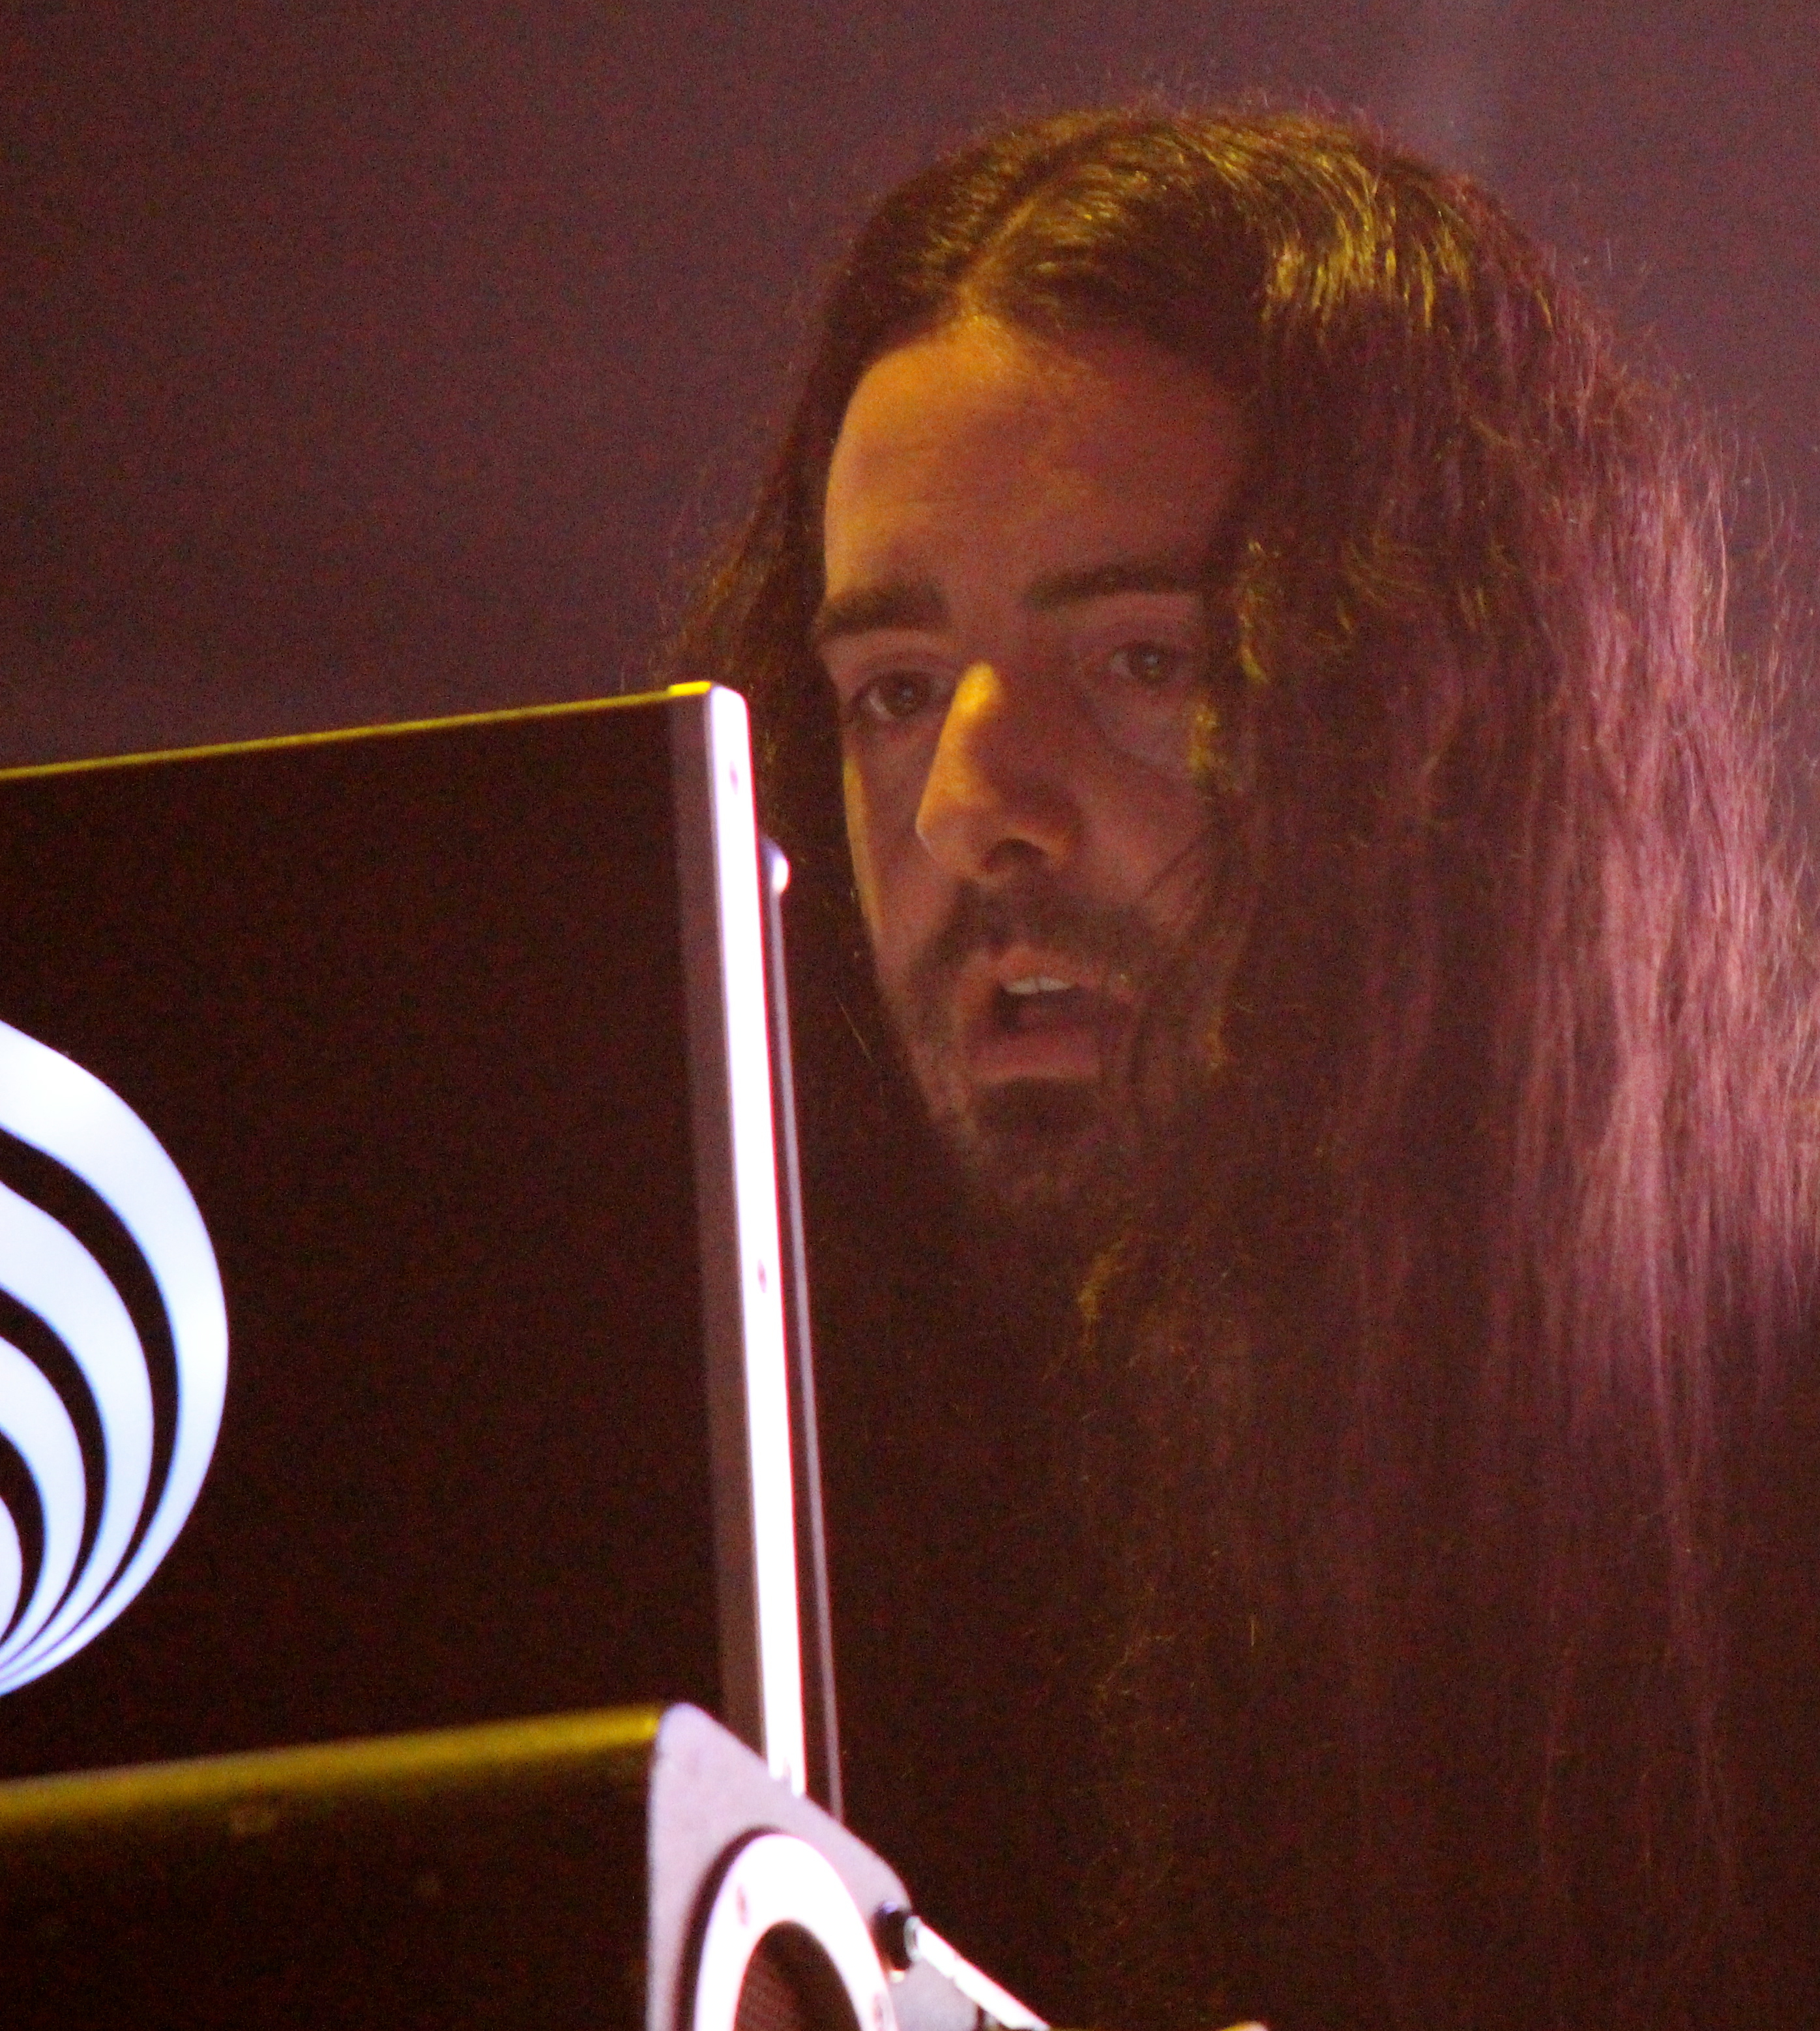 Big Beats: Bassnectar in the mix.